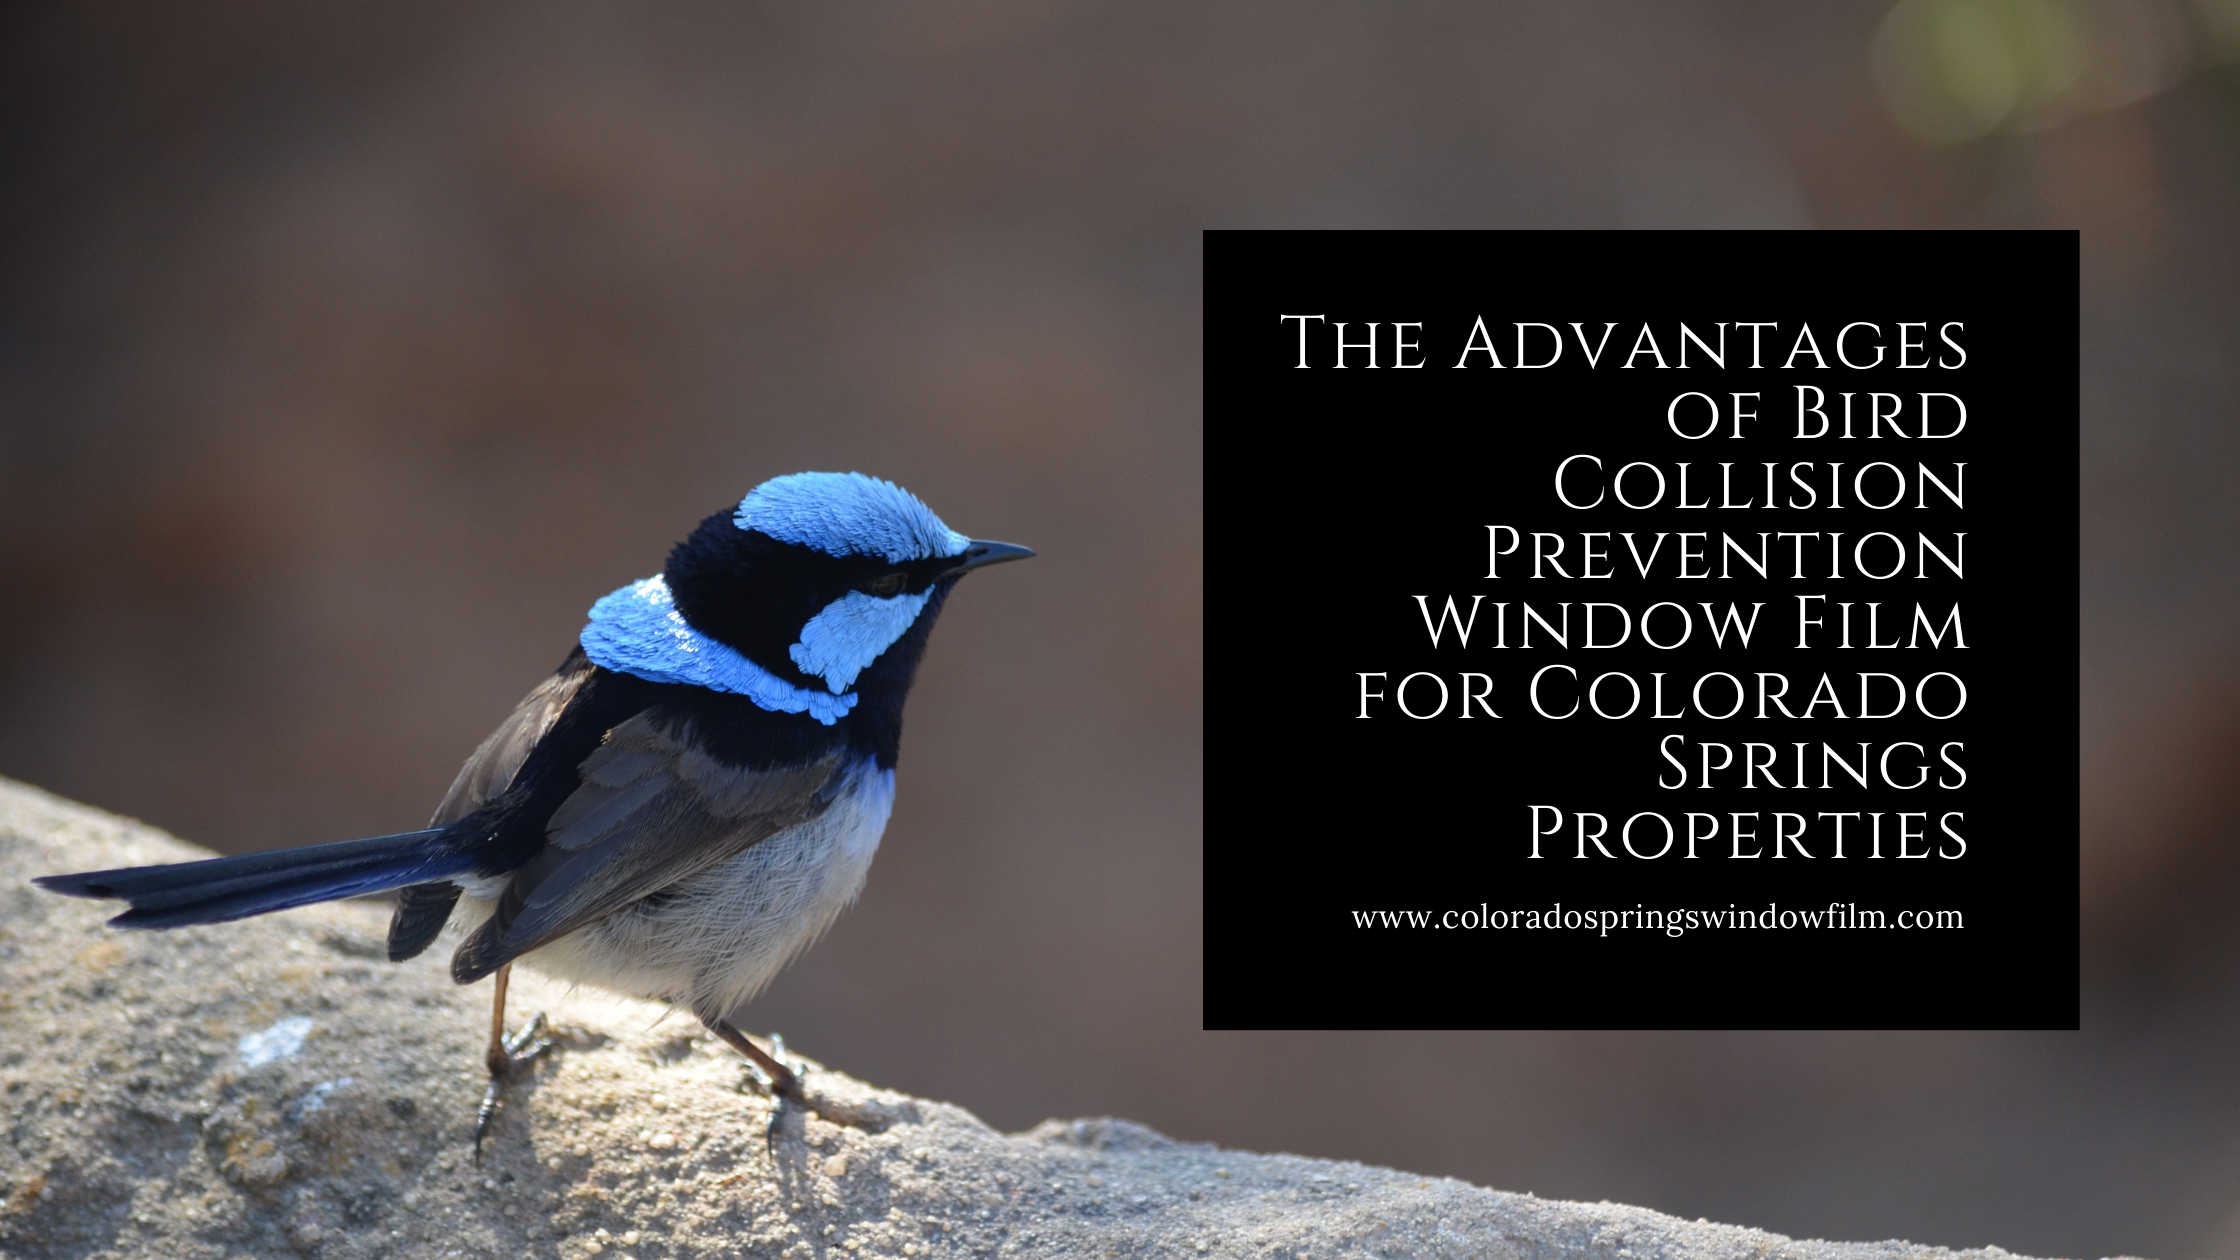 The Advantages of Bird Collision Prevention Window Film for Colorado Springs Properties